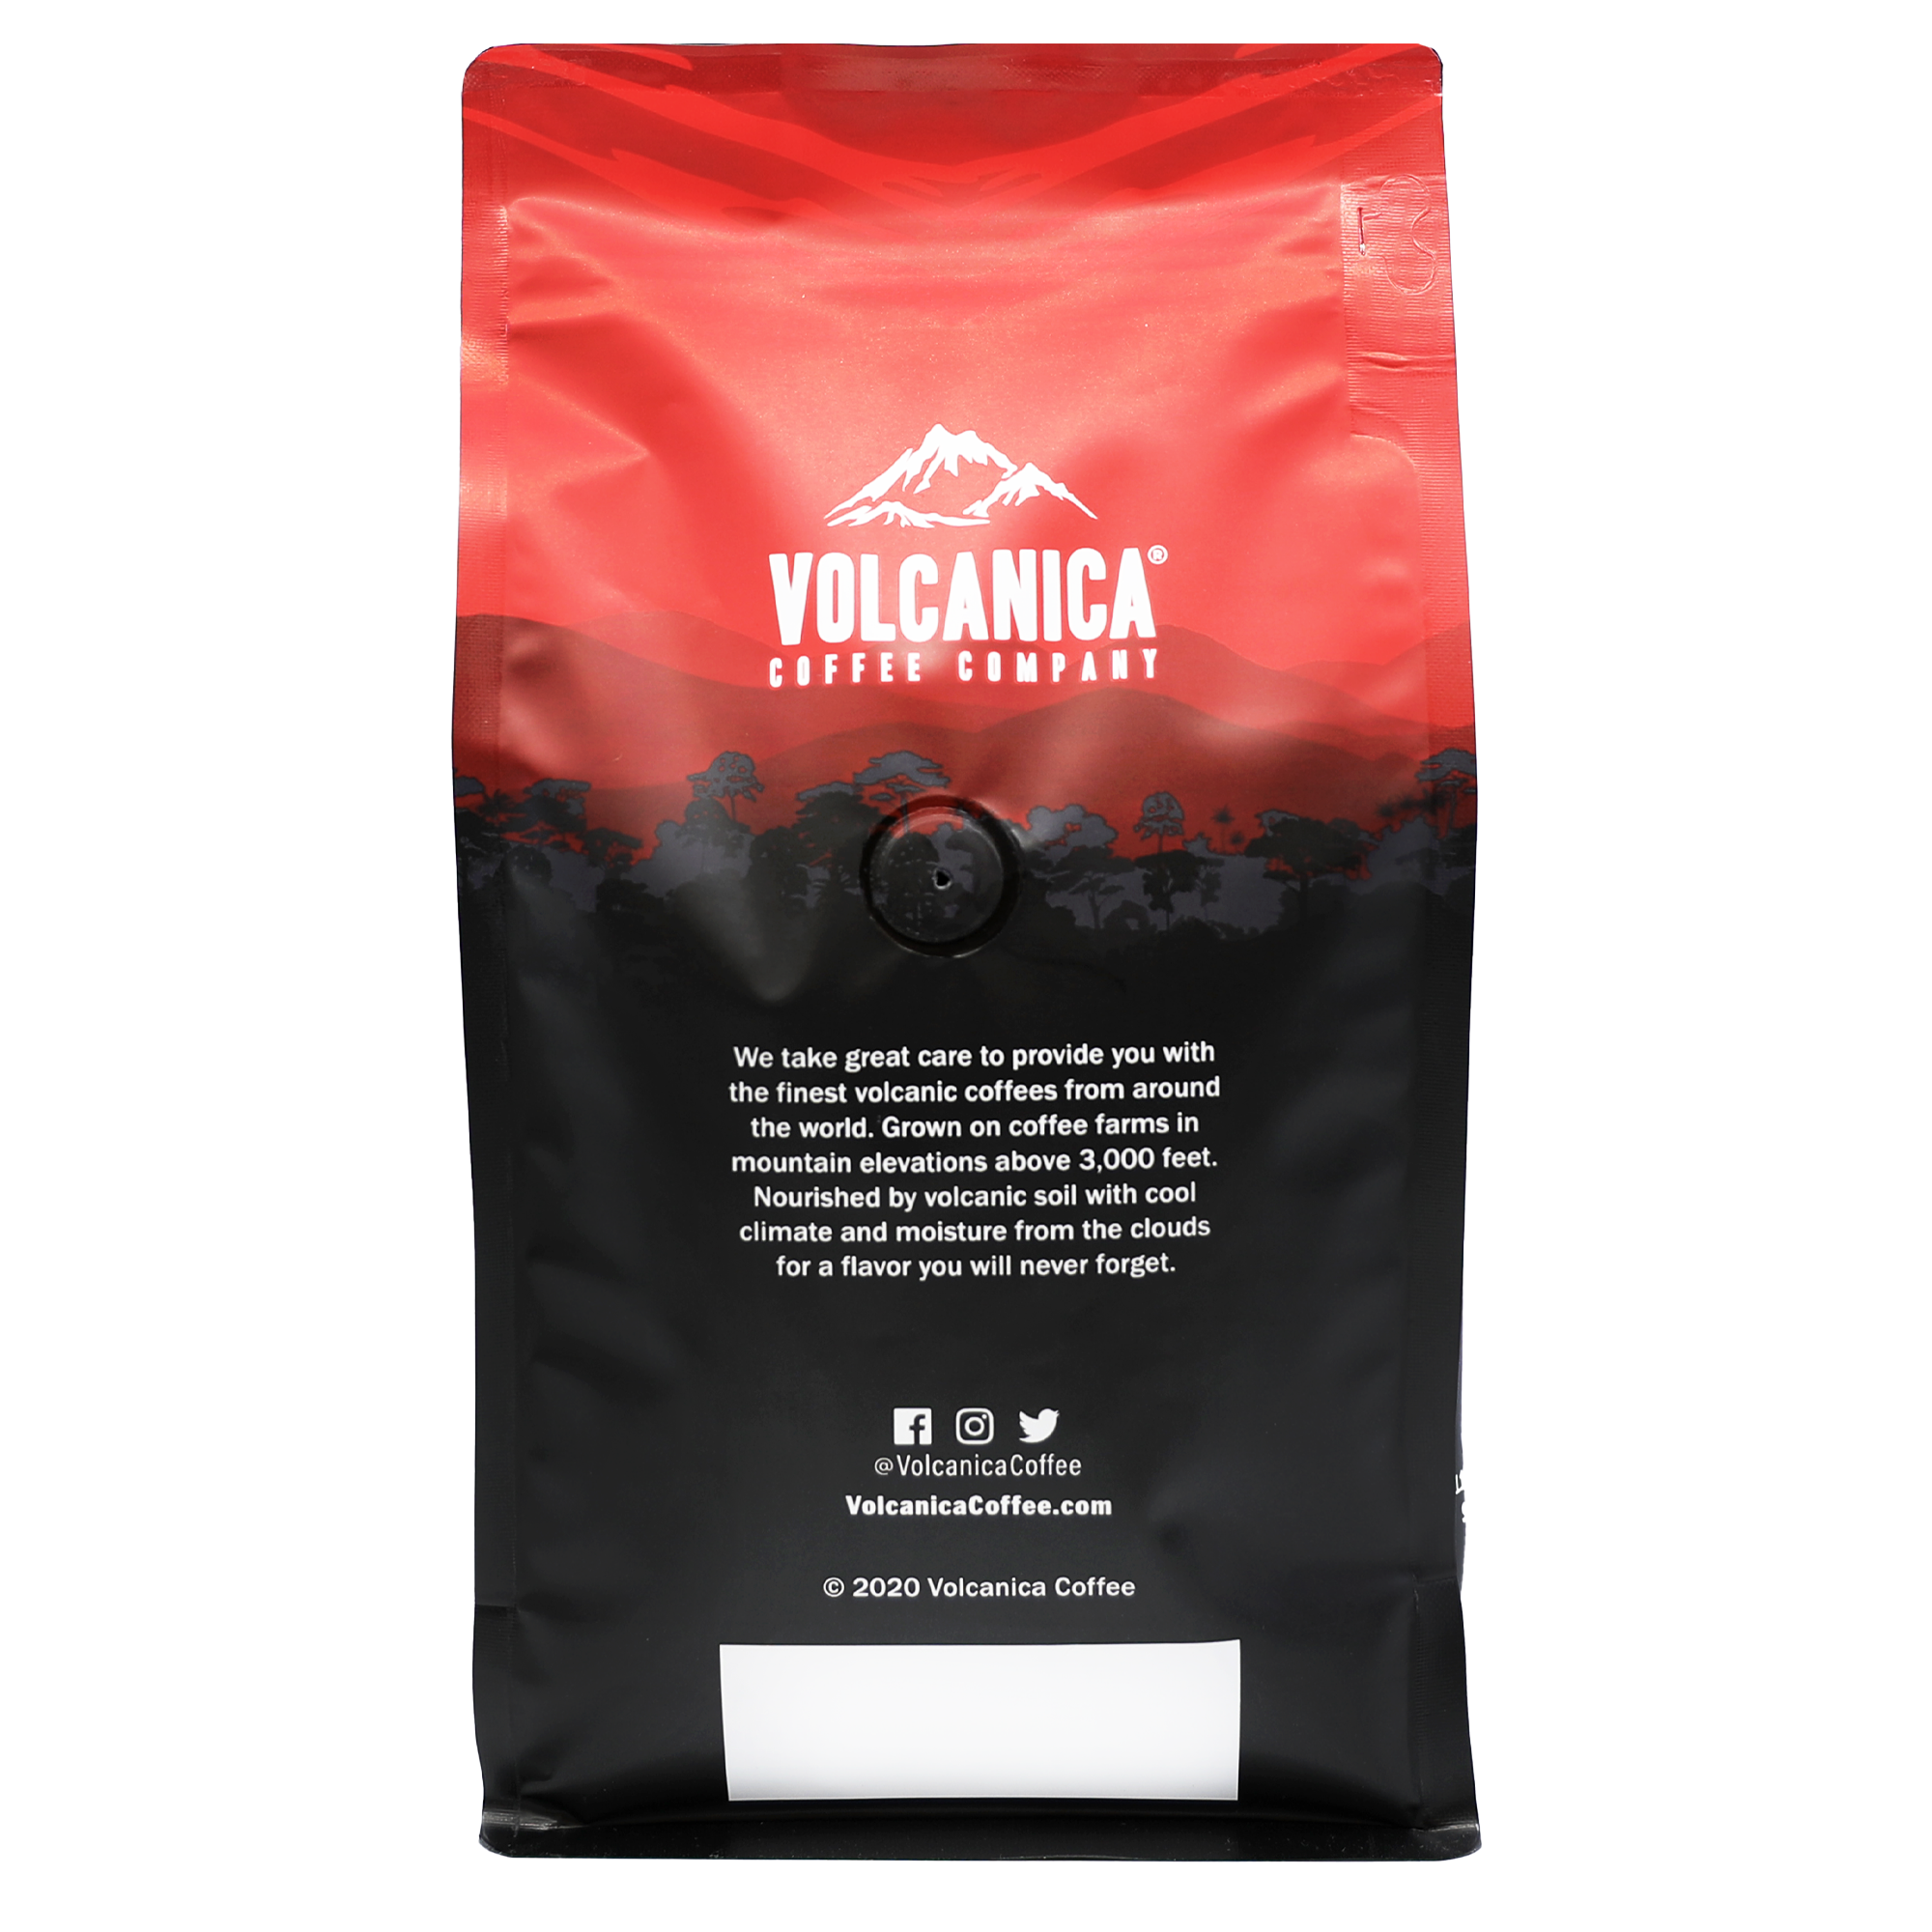 Salted Caramel Flavored Coffee - Volcanica Coffee